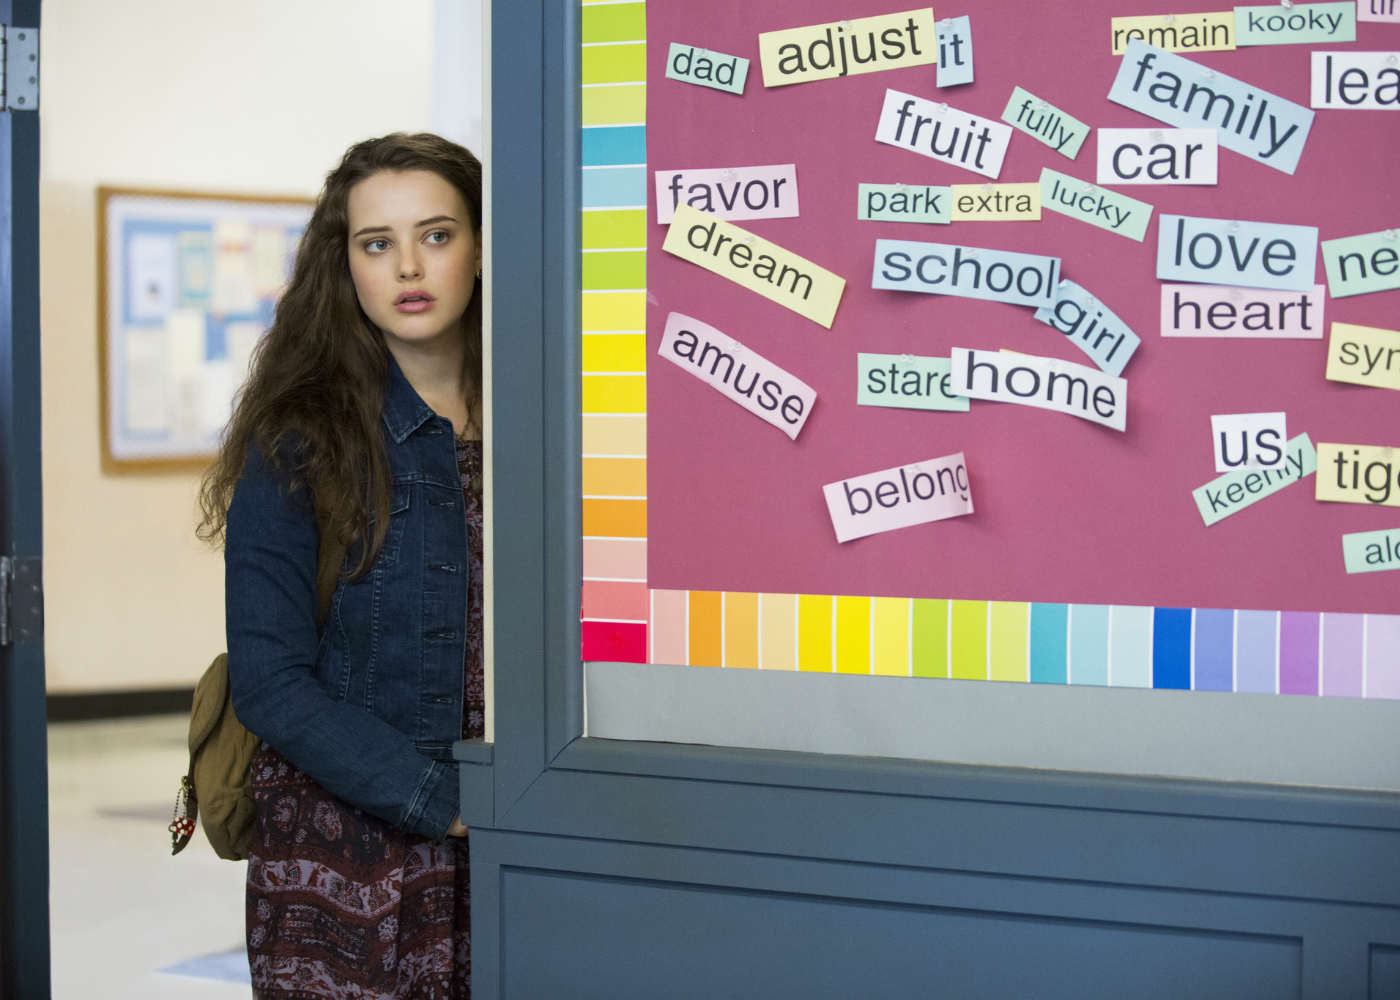 13 Reasons Why Officially Renewed for Season 2